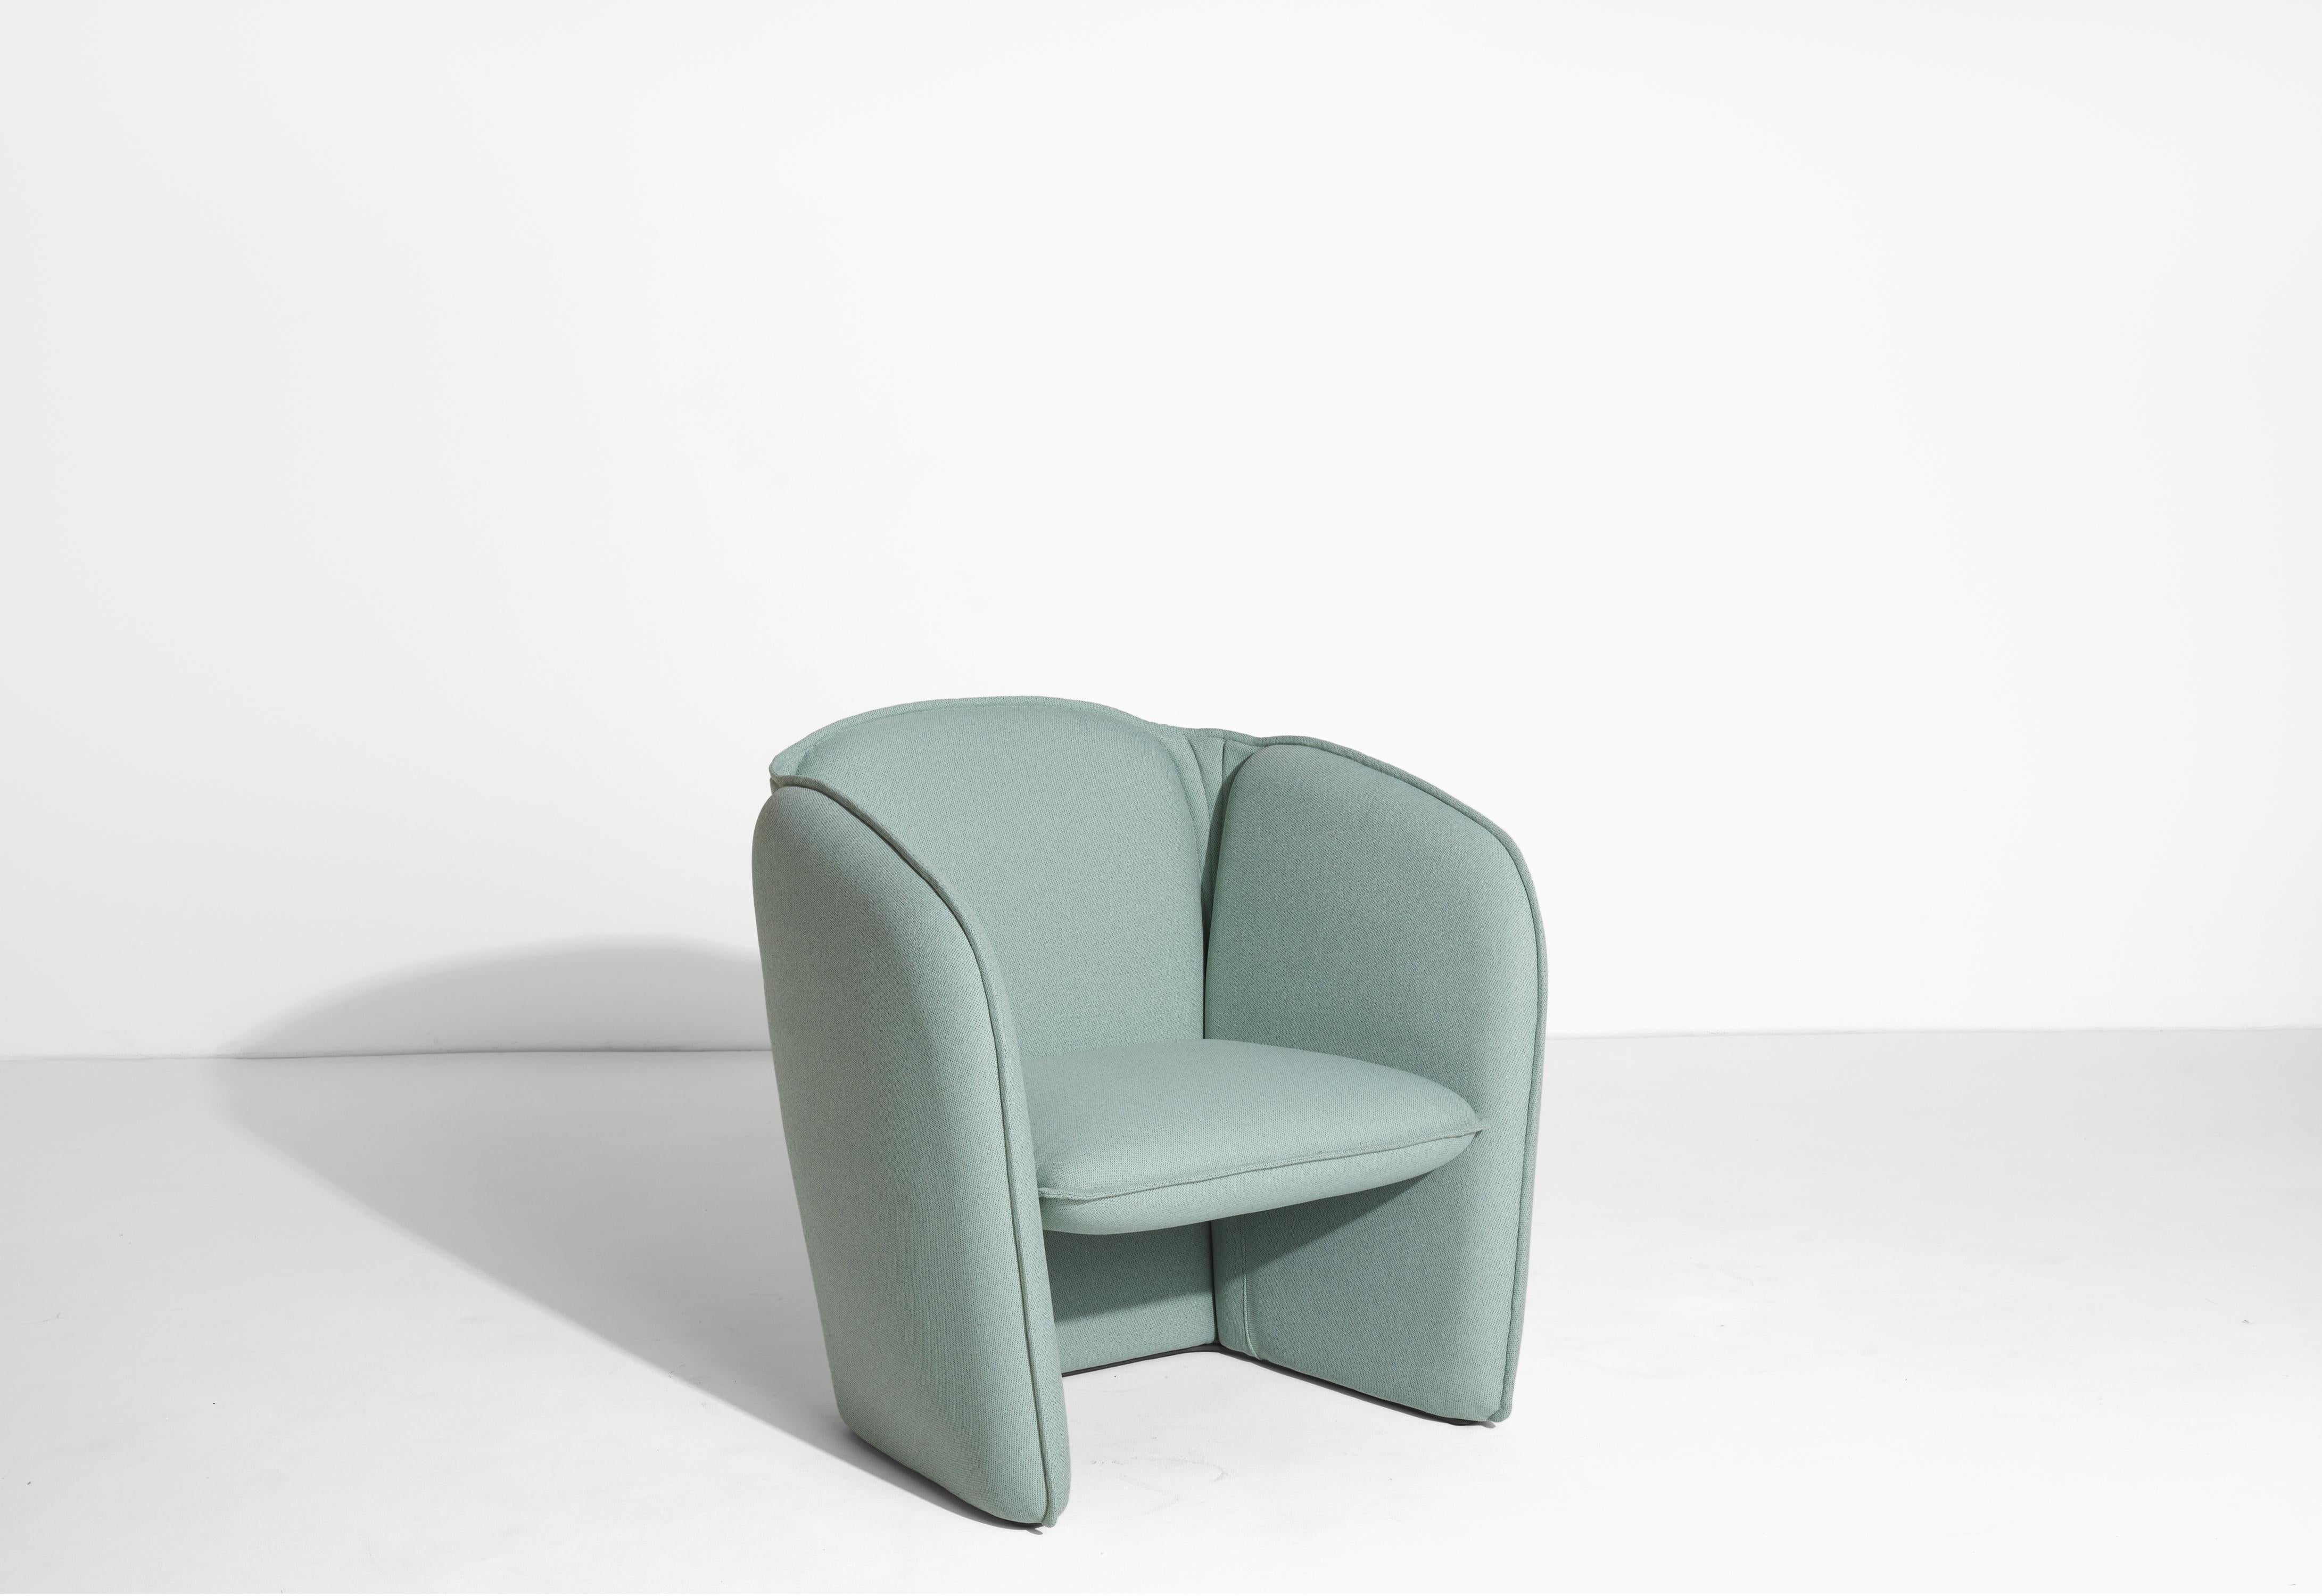 Contemporary Petite Friture Lily Armchair in Light Blue by Färg & Blanche, 2022 For Sale